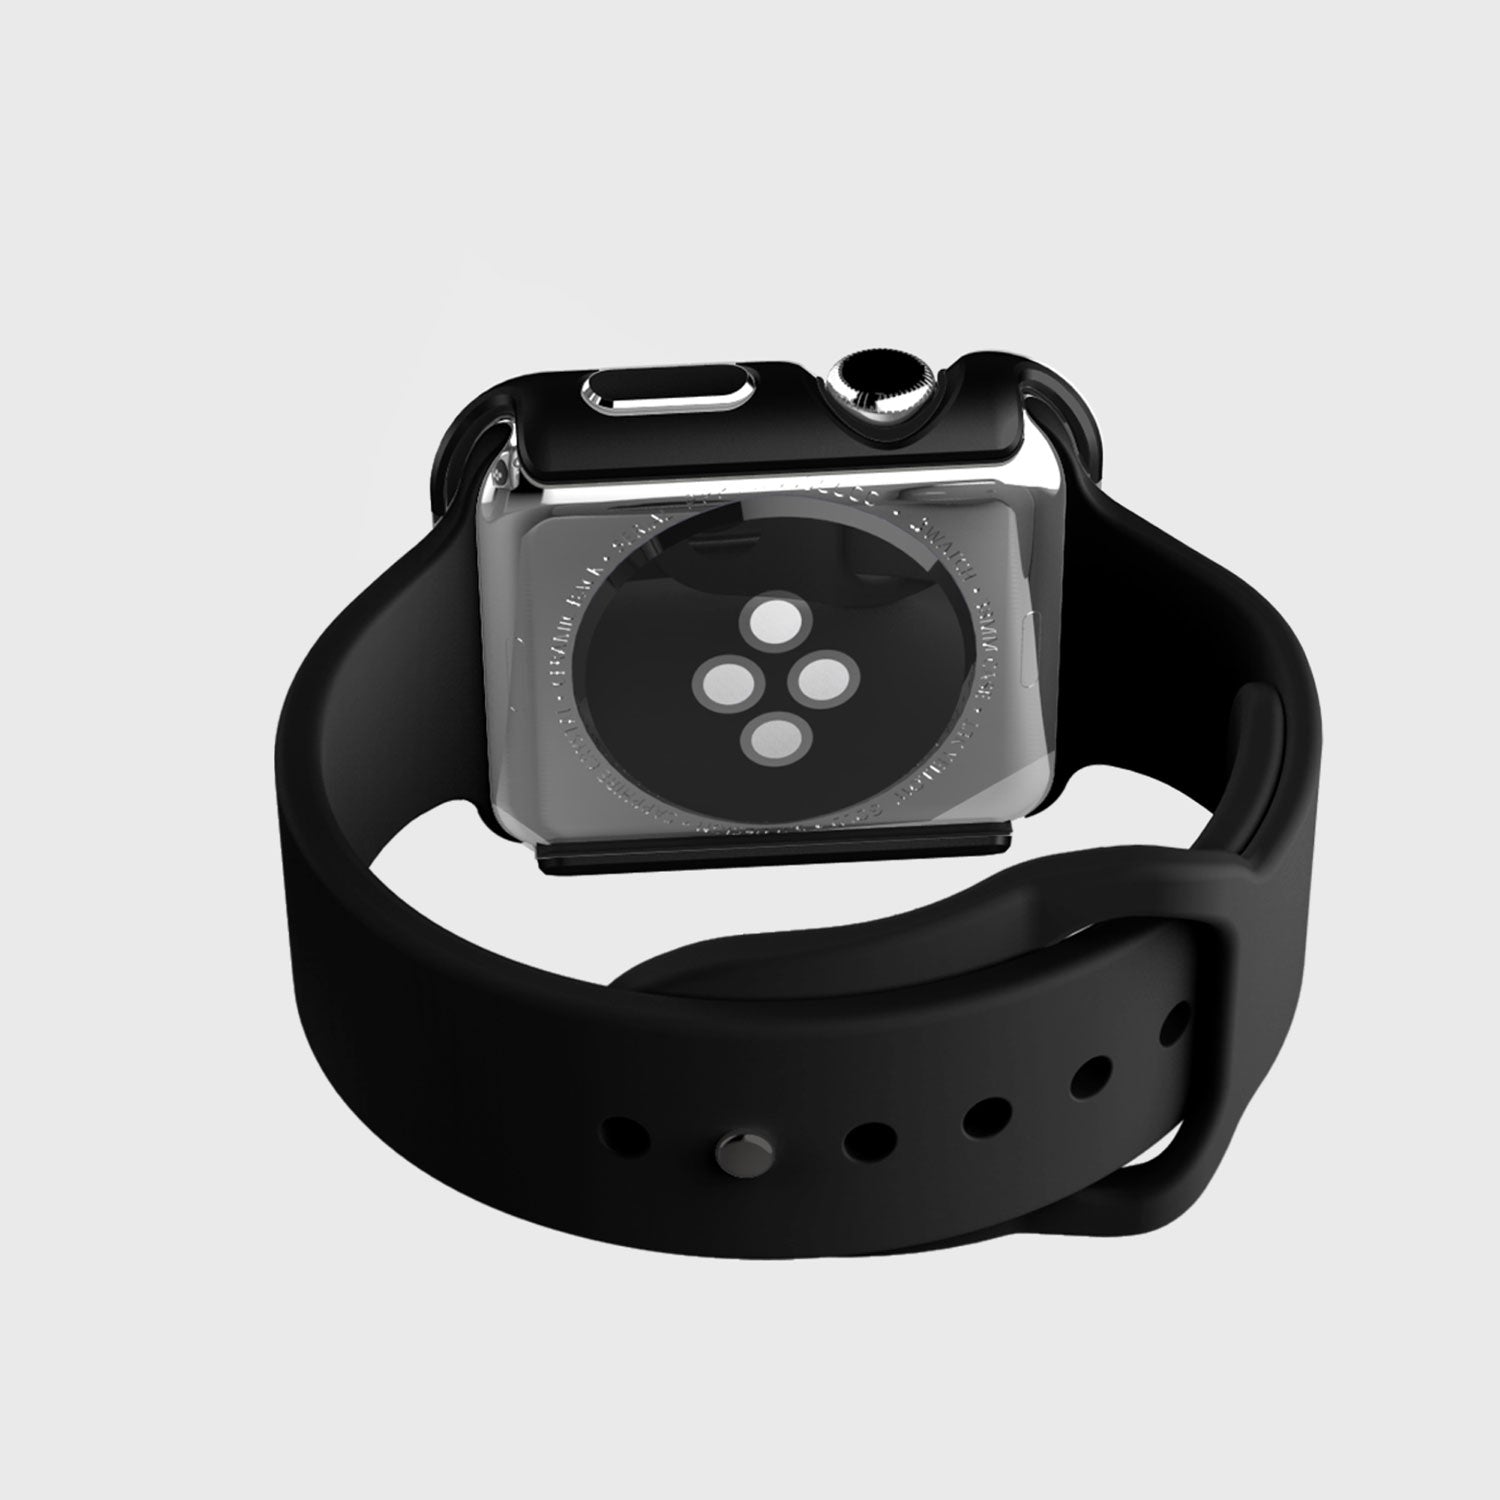 A black Raptic EDGE Apple Watch with a premium machined anodized aluminum bumper on a white background.